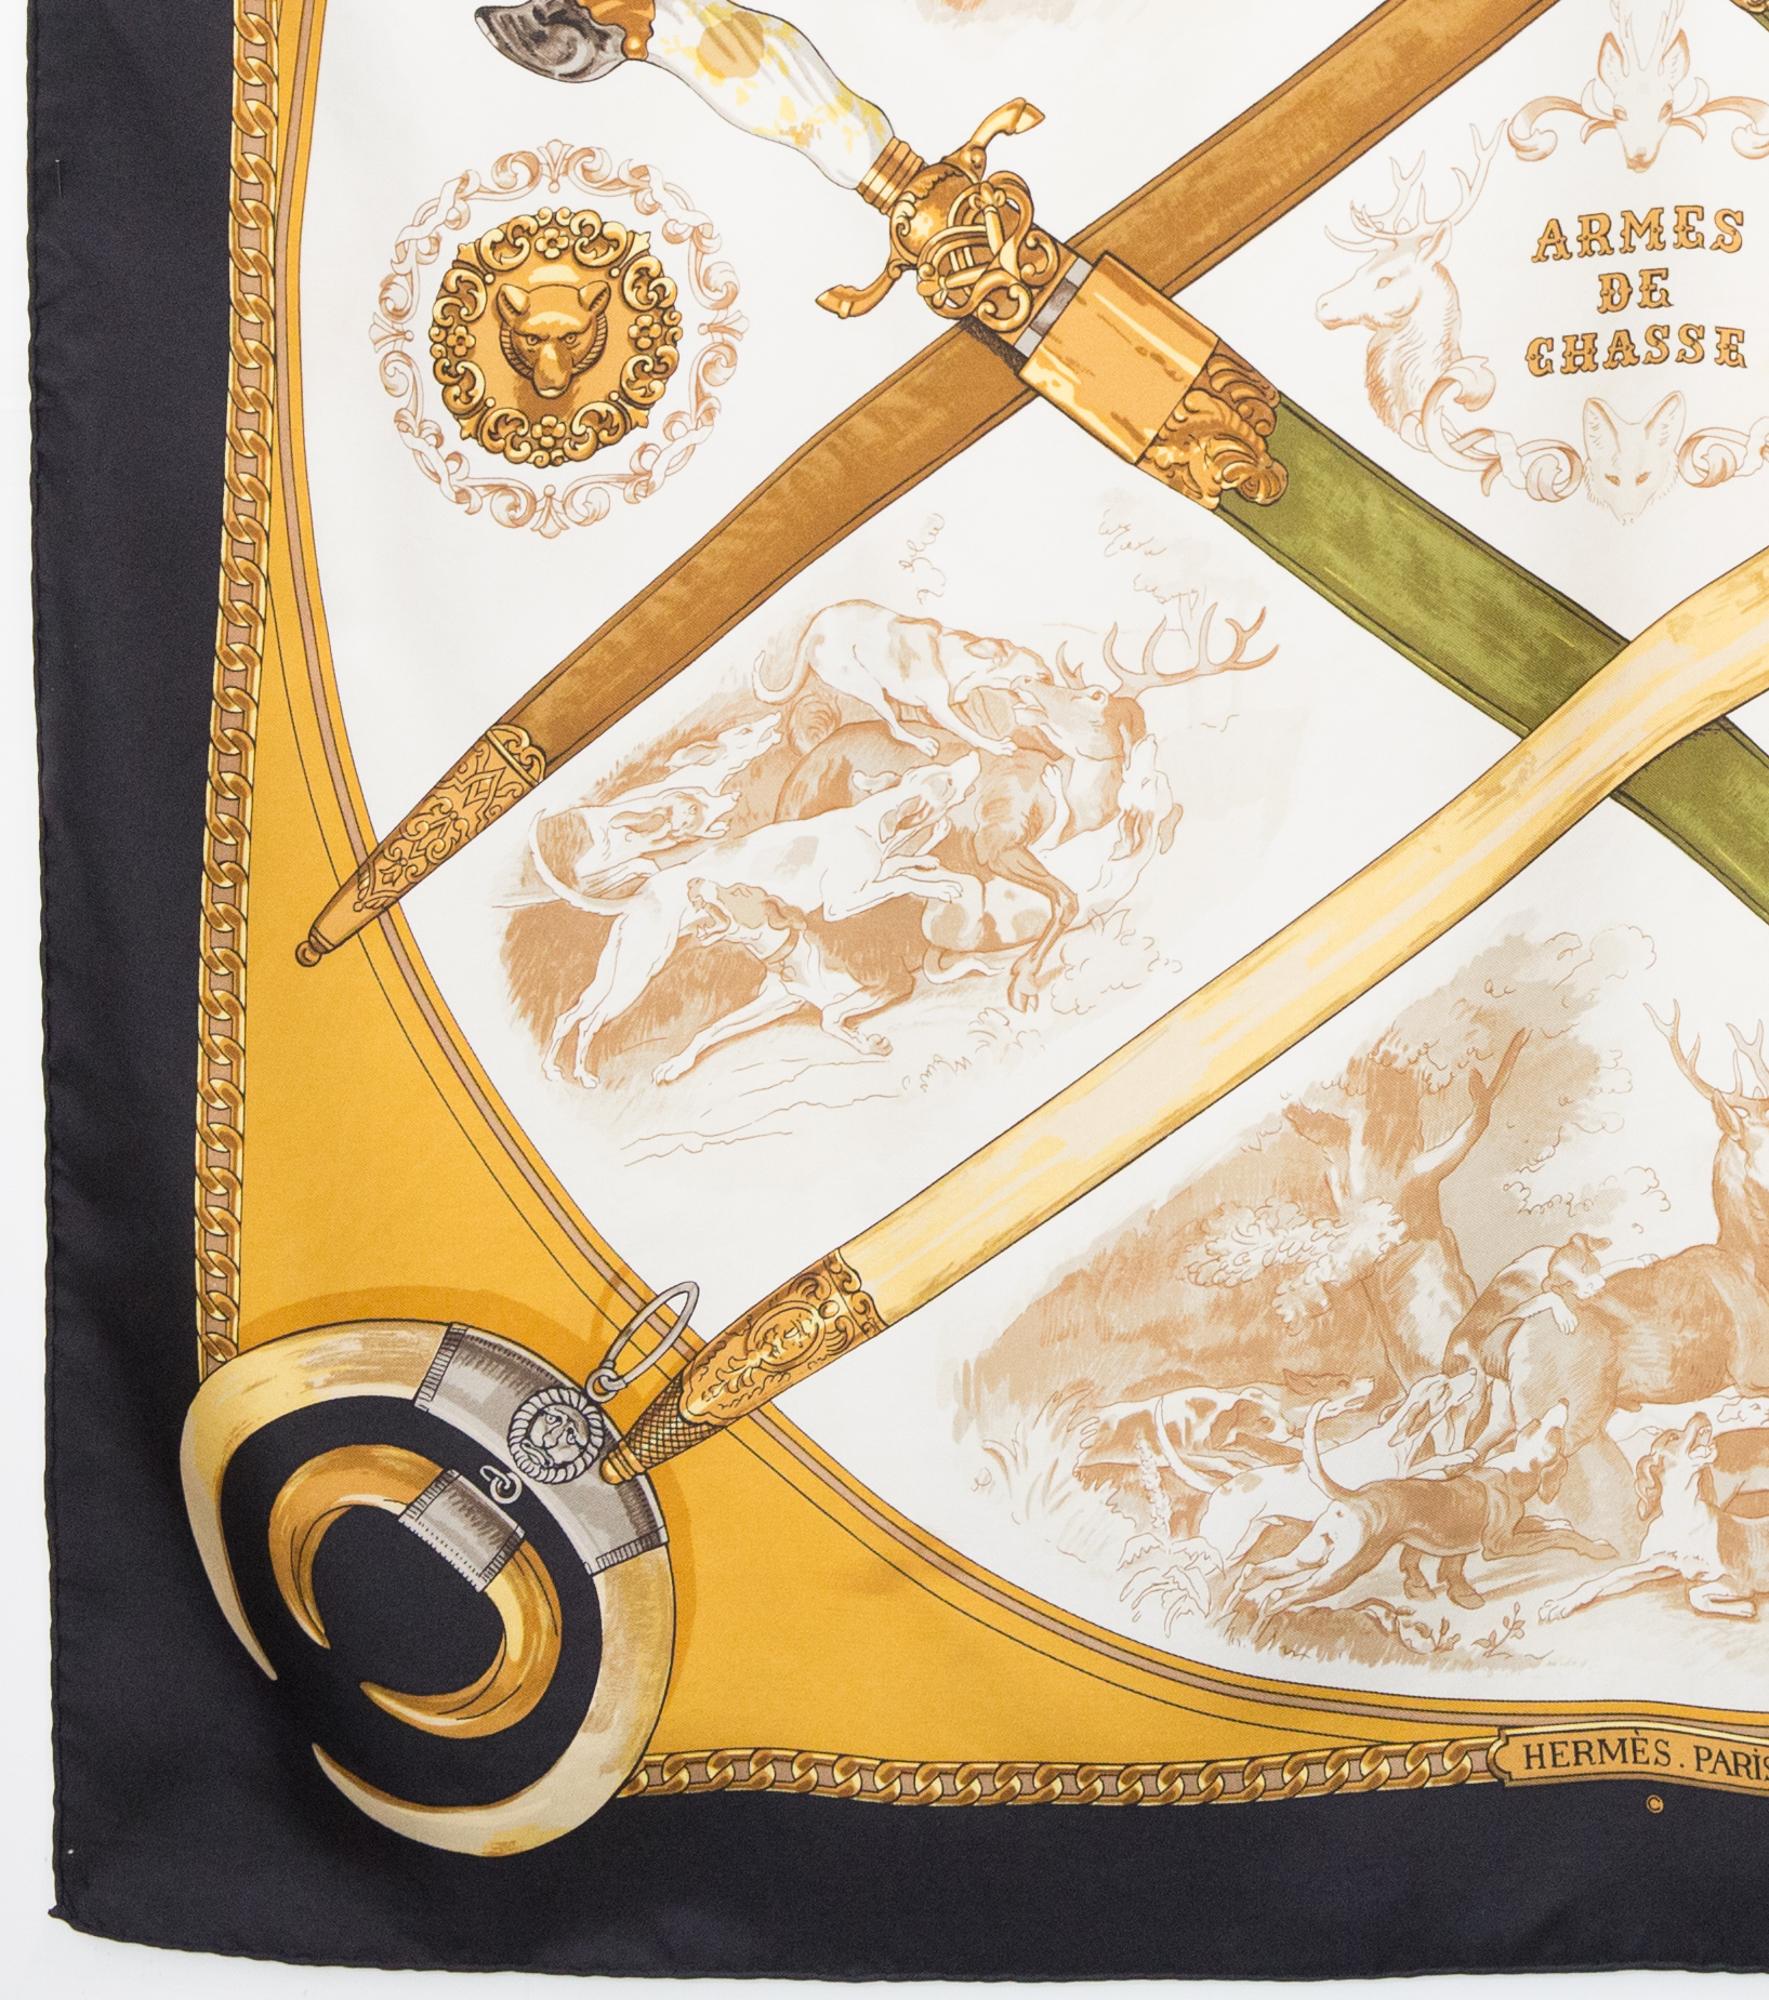 Hermes Armes de Chasse by P Ledoux Silk Scarf In Good Condition For Sale In Paris, FR